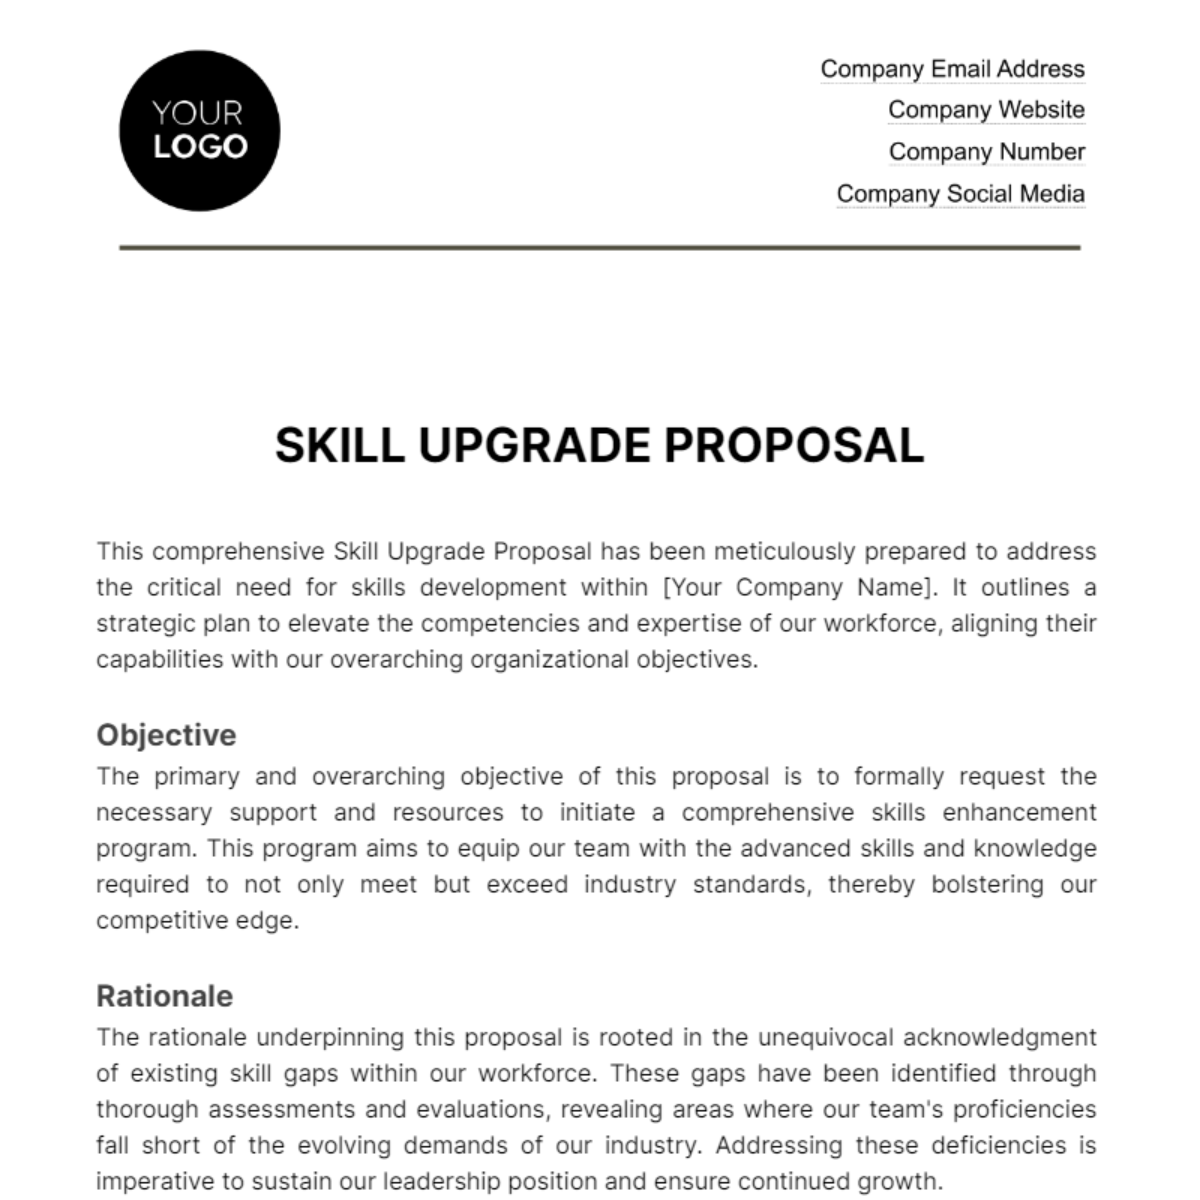 Skill Upgrade Proposal HR Template